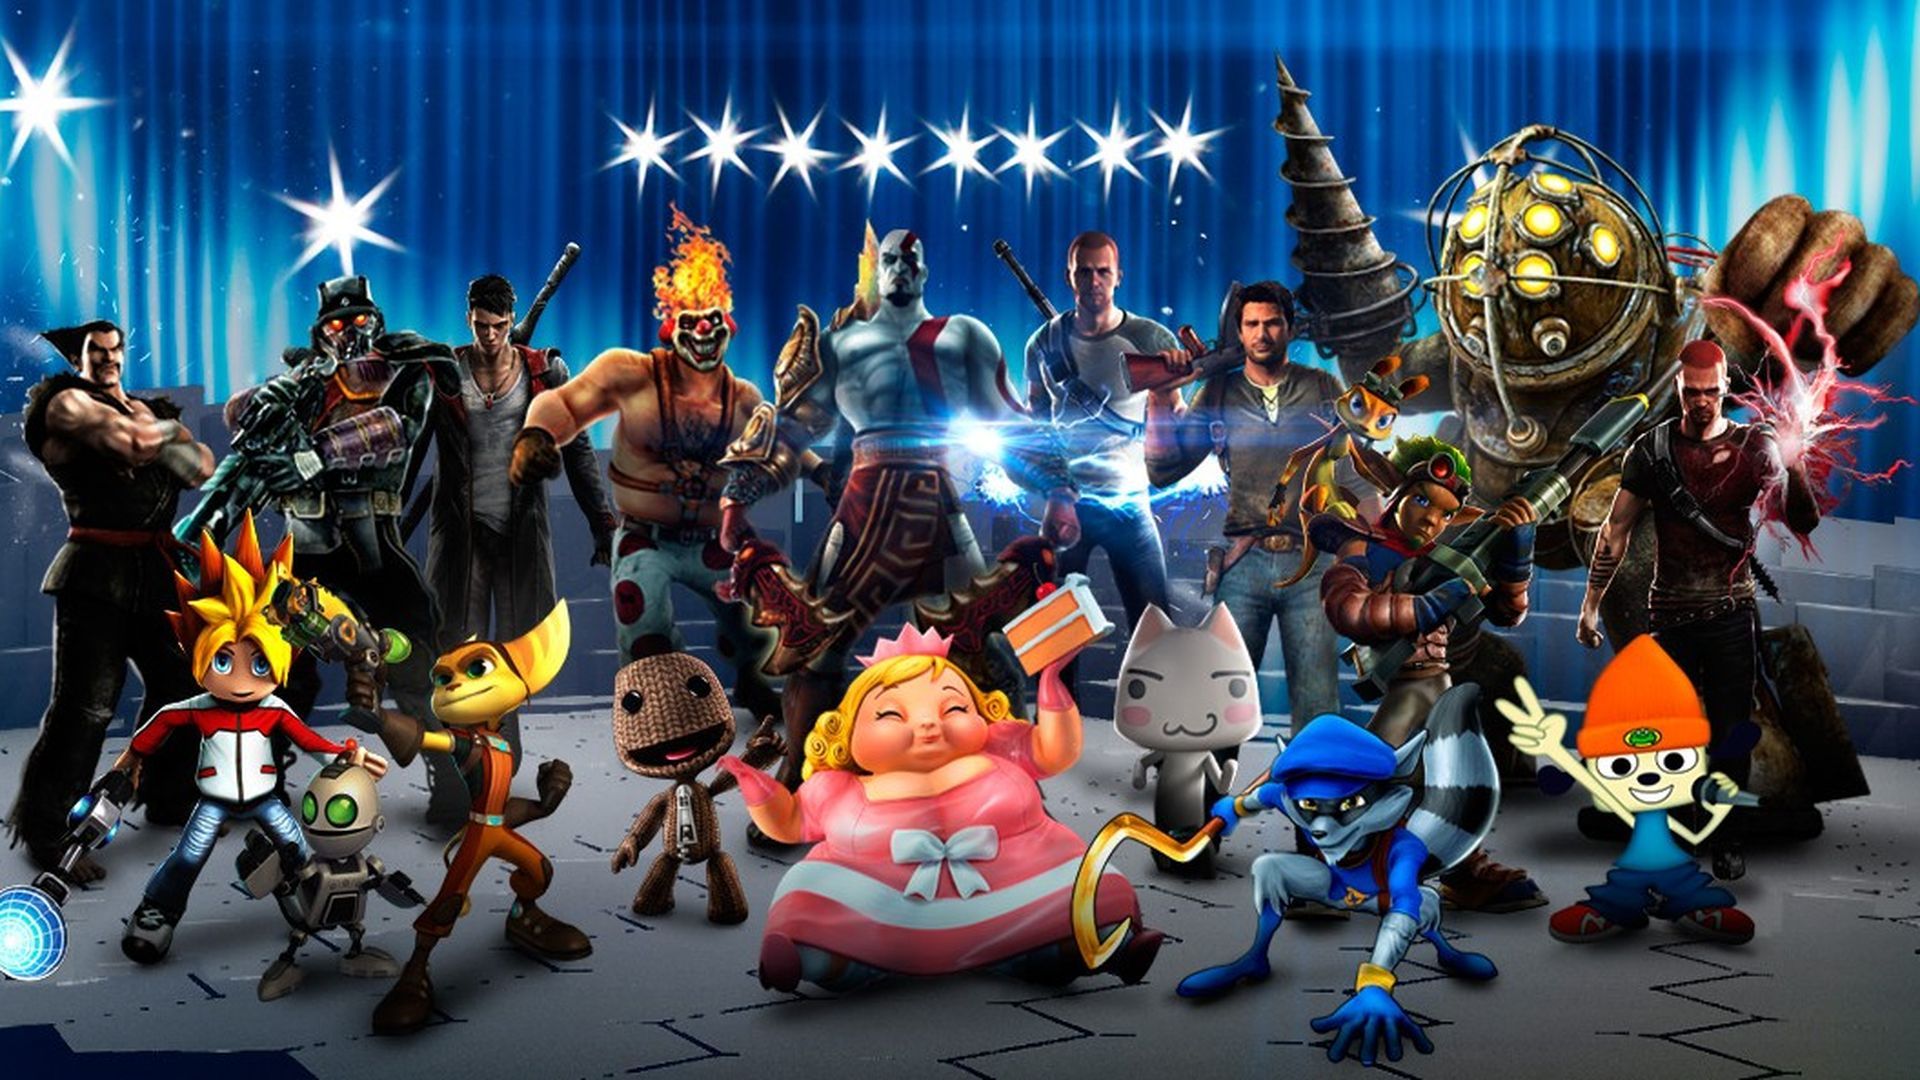 Heroes ps5. PLAYSTATION all-Stars: Battle Royale. PLAYSTATION all-Stars Battle Royale 2. PLAYSTATION all-Stars Battle Royale персонажи. PLAYSTATION all-Stars Battle Royale ps3.